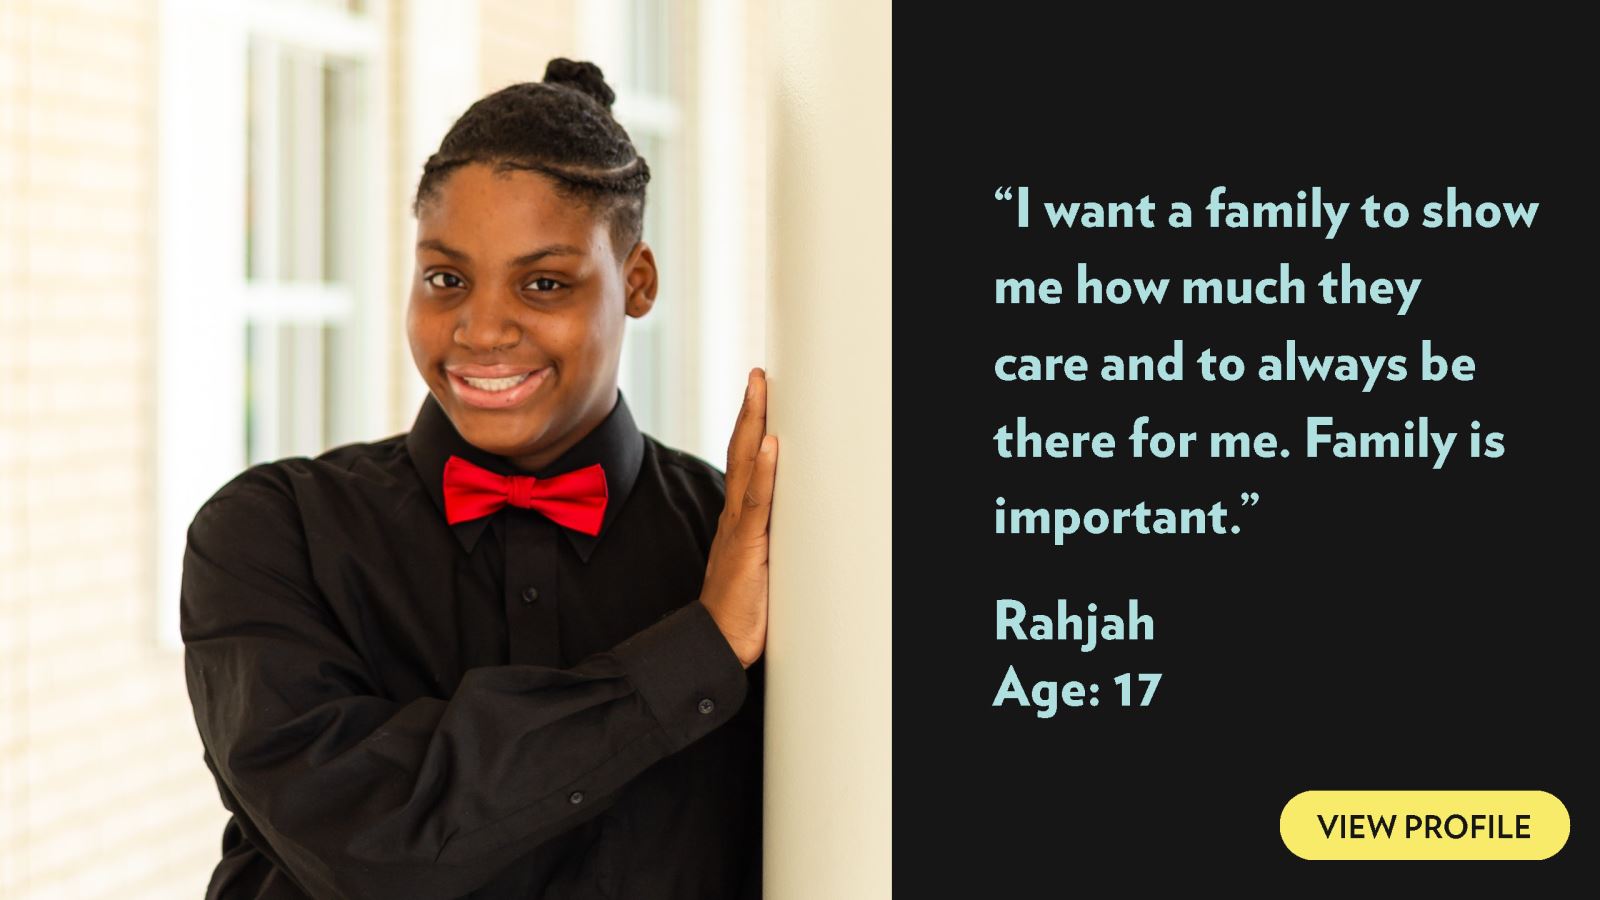 I want a family to show me how much they care and to always be there for me. Family is important. Rahjah, age 17. View profile.